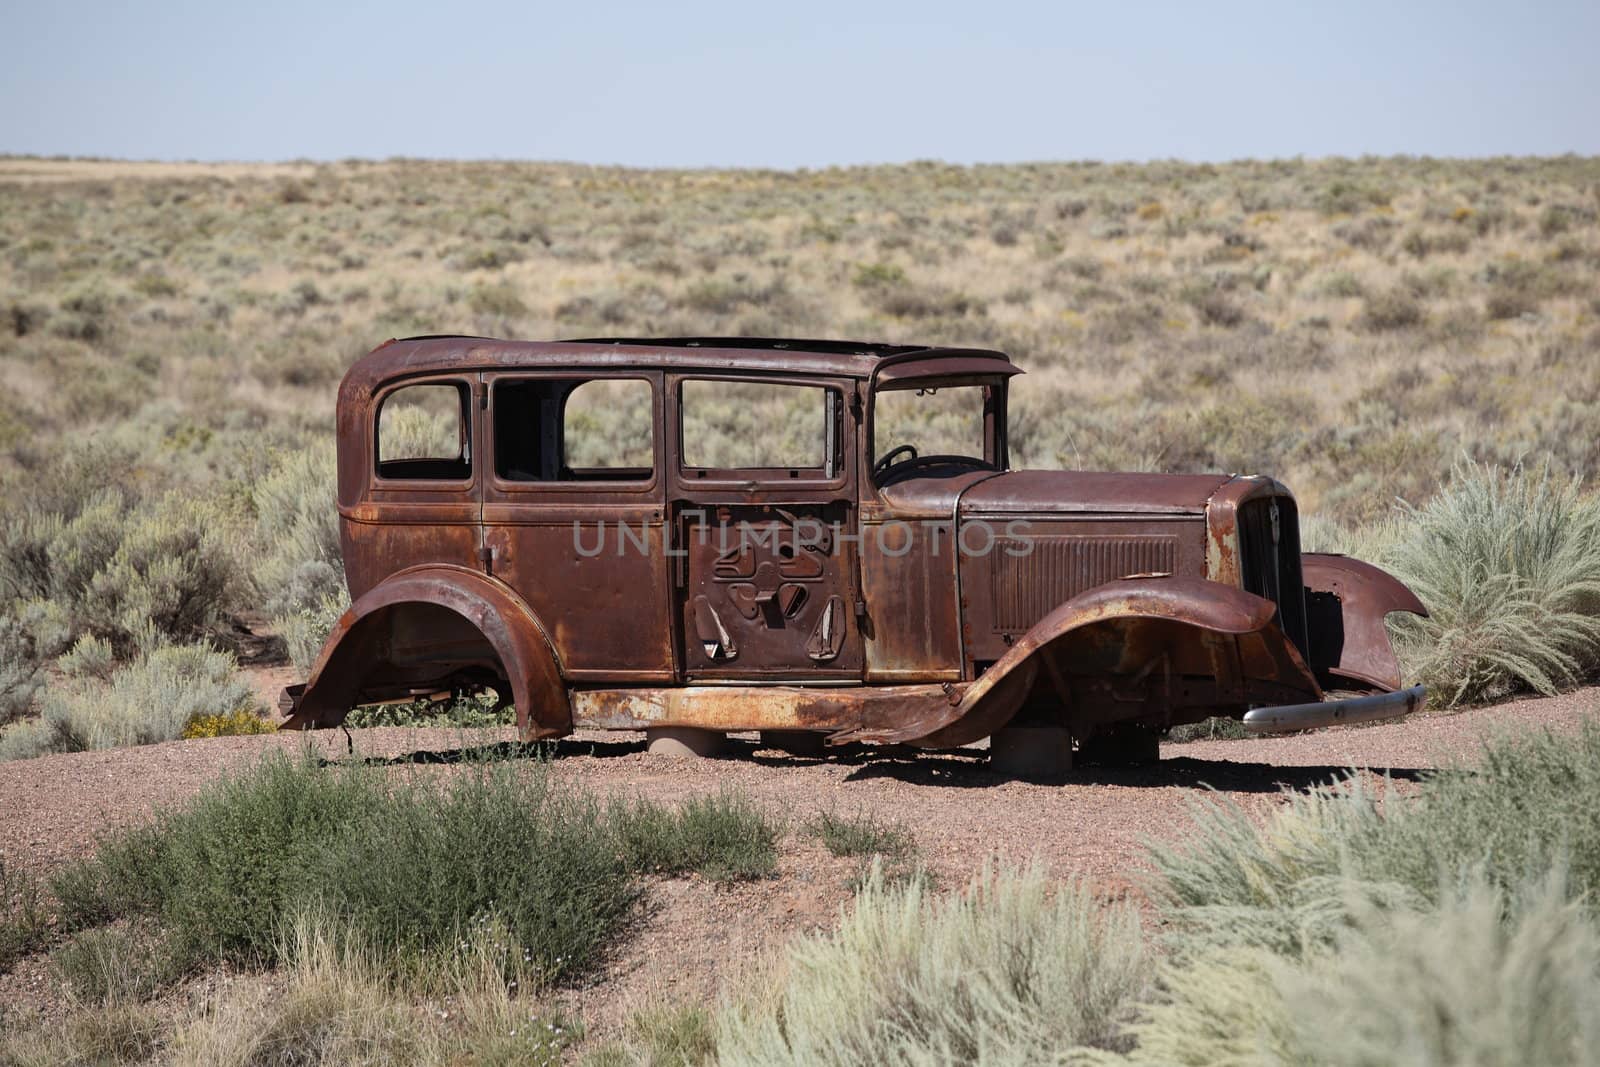 Route 66 - Abandoned Car by Ffooter